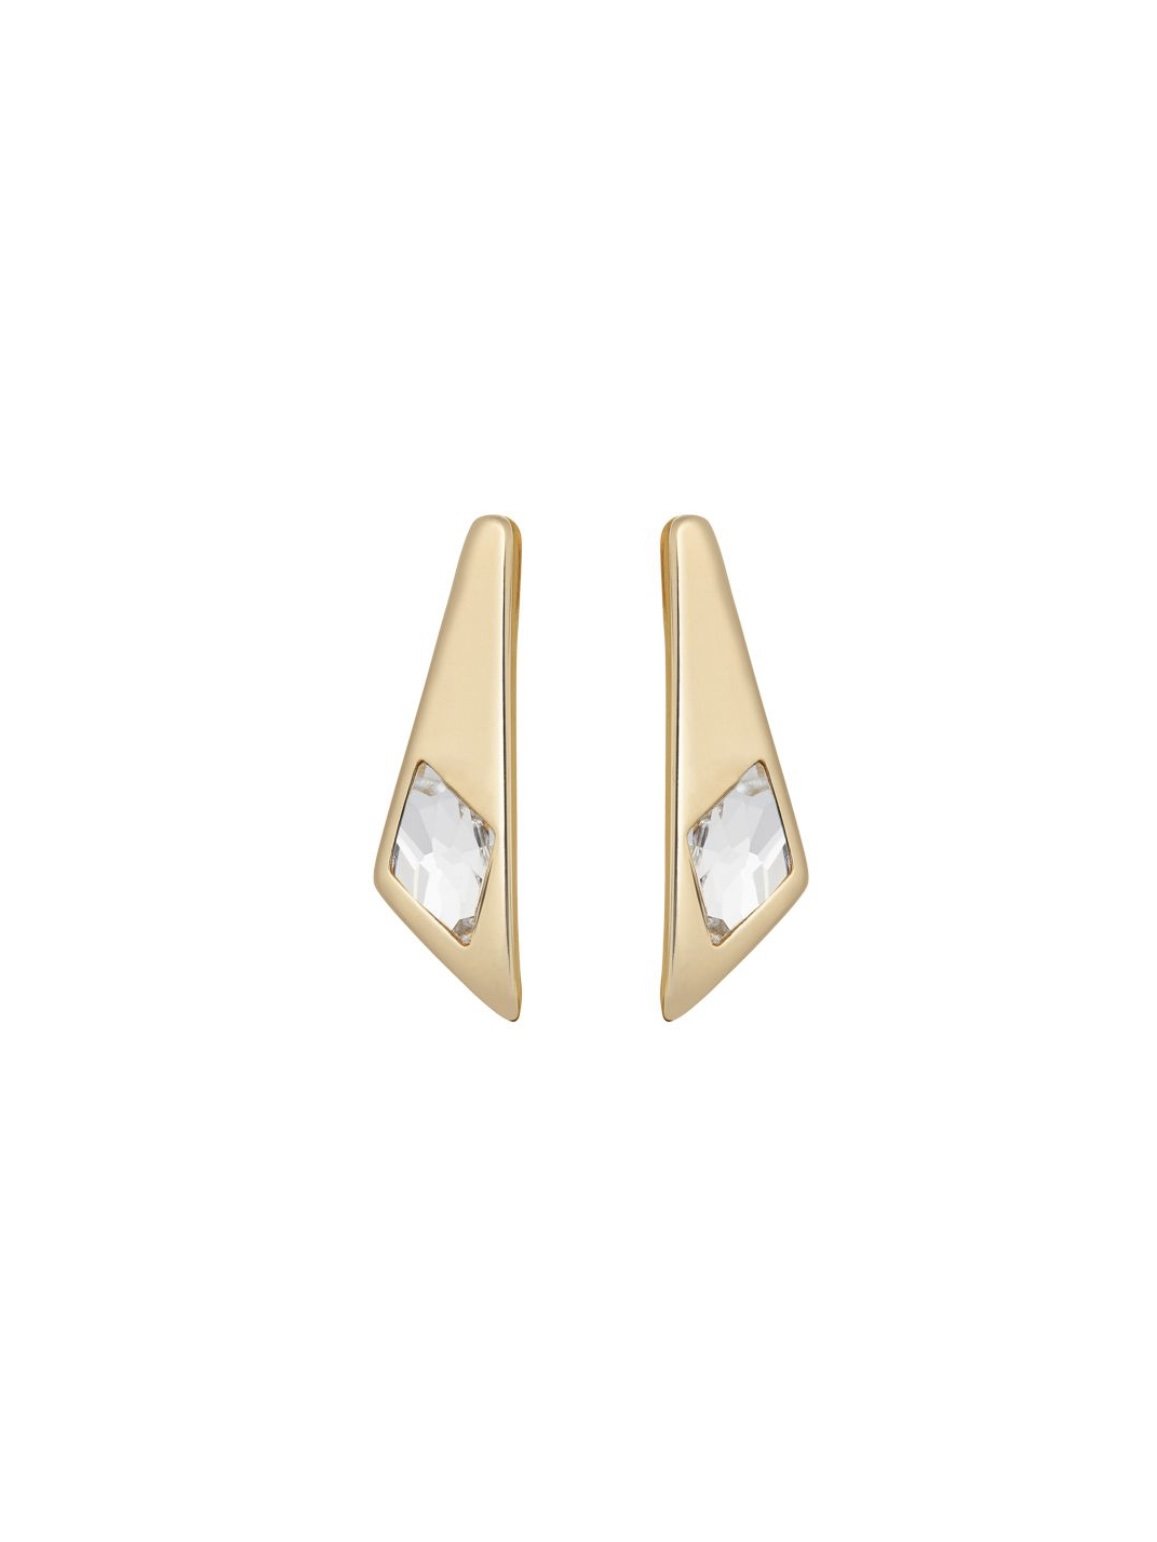 Superstition Earrings - Gold